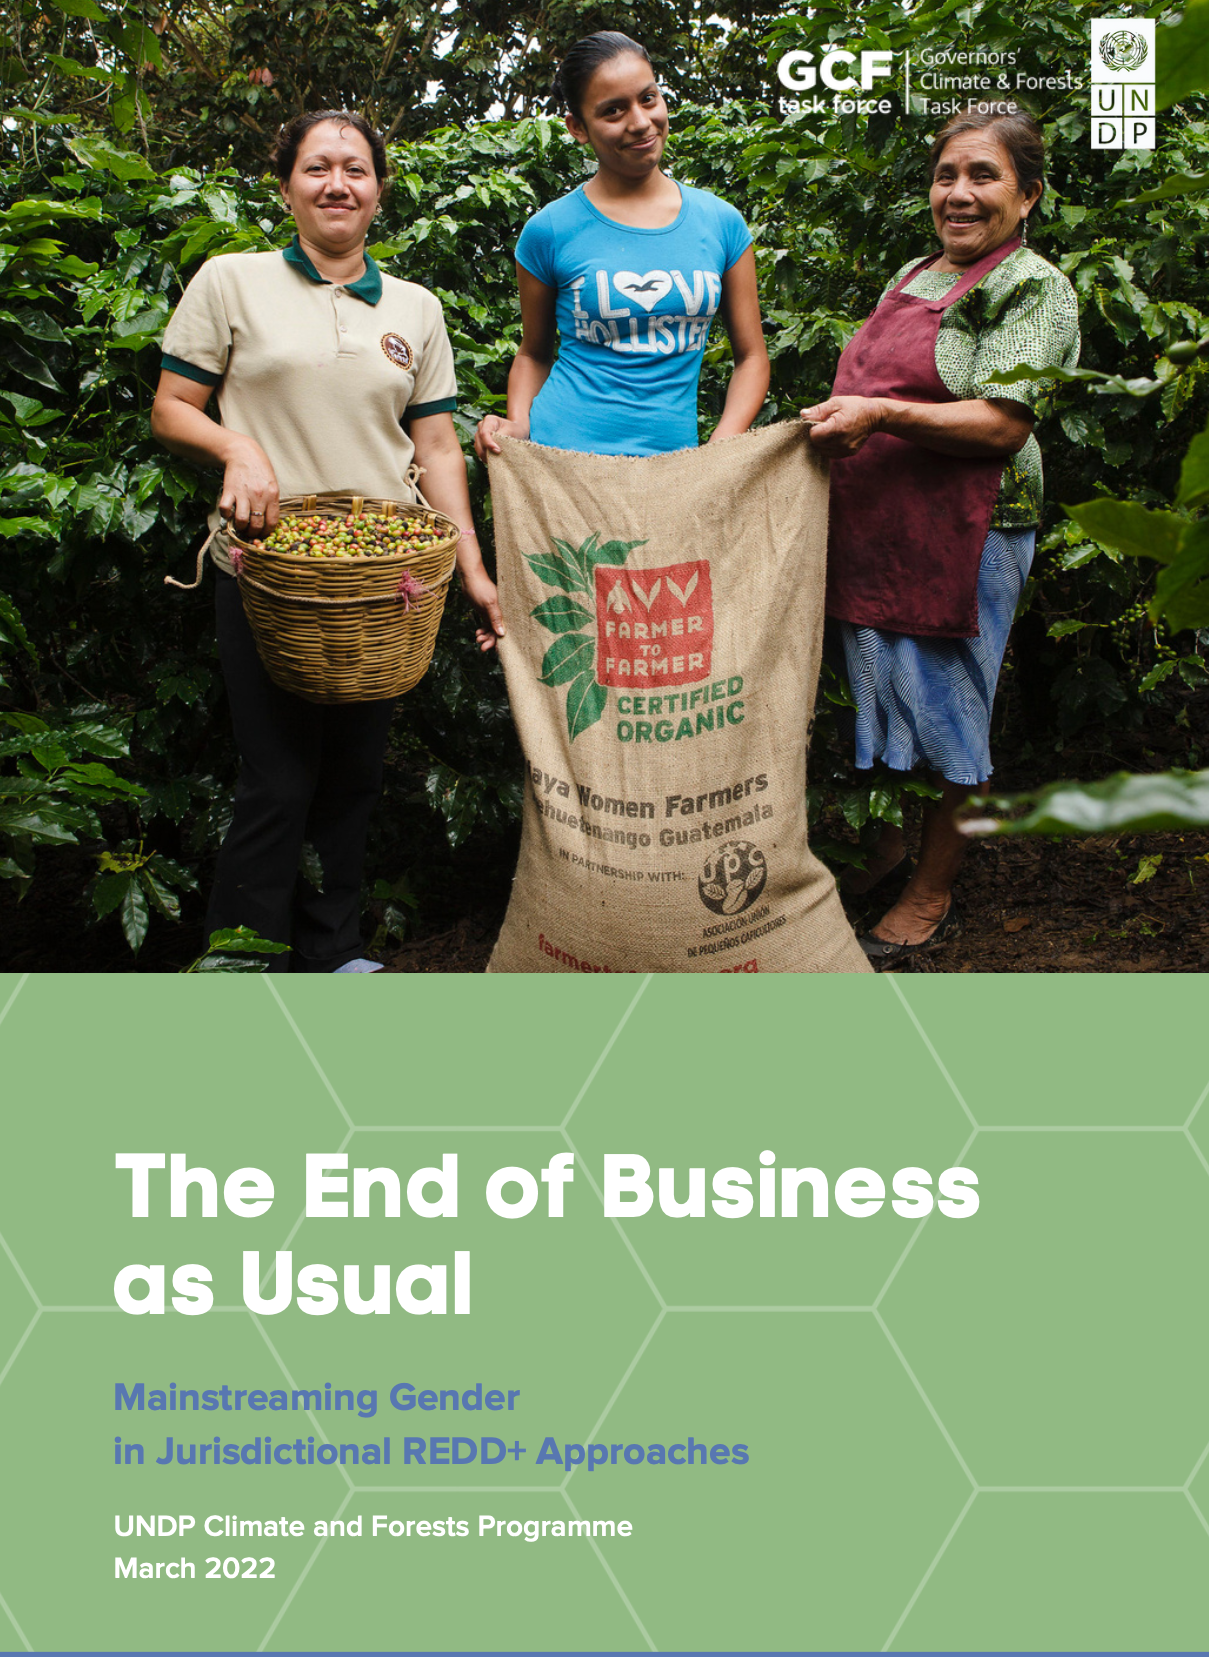 The End of Business as Usual: Mainstreaming Gender in Jurisdictional REDD+ Approaches